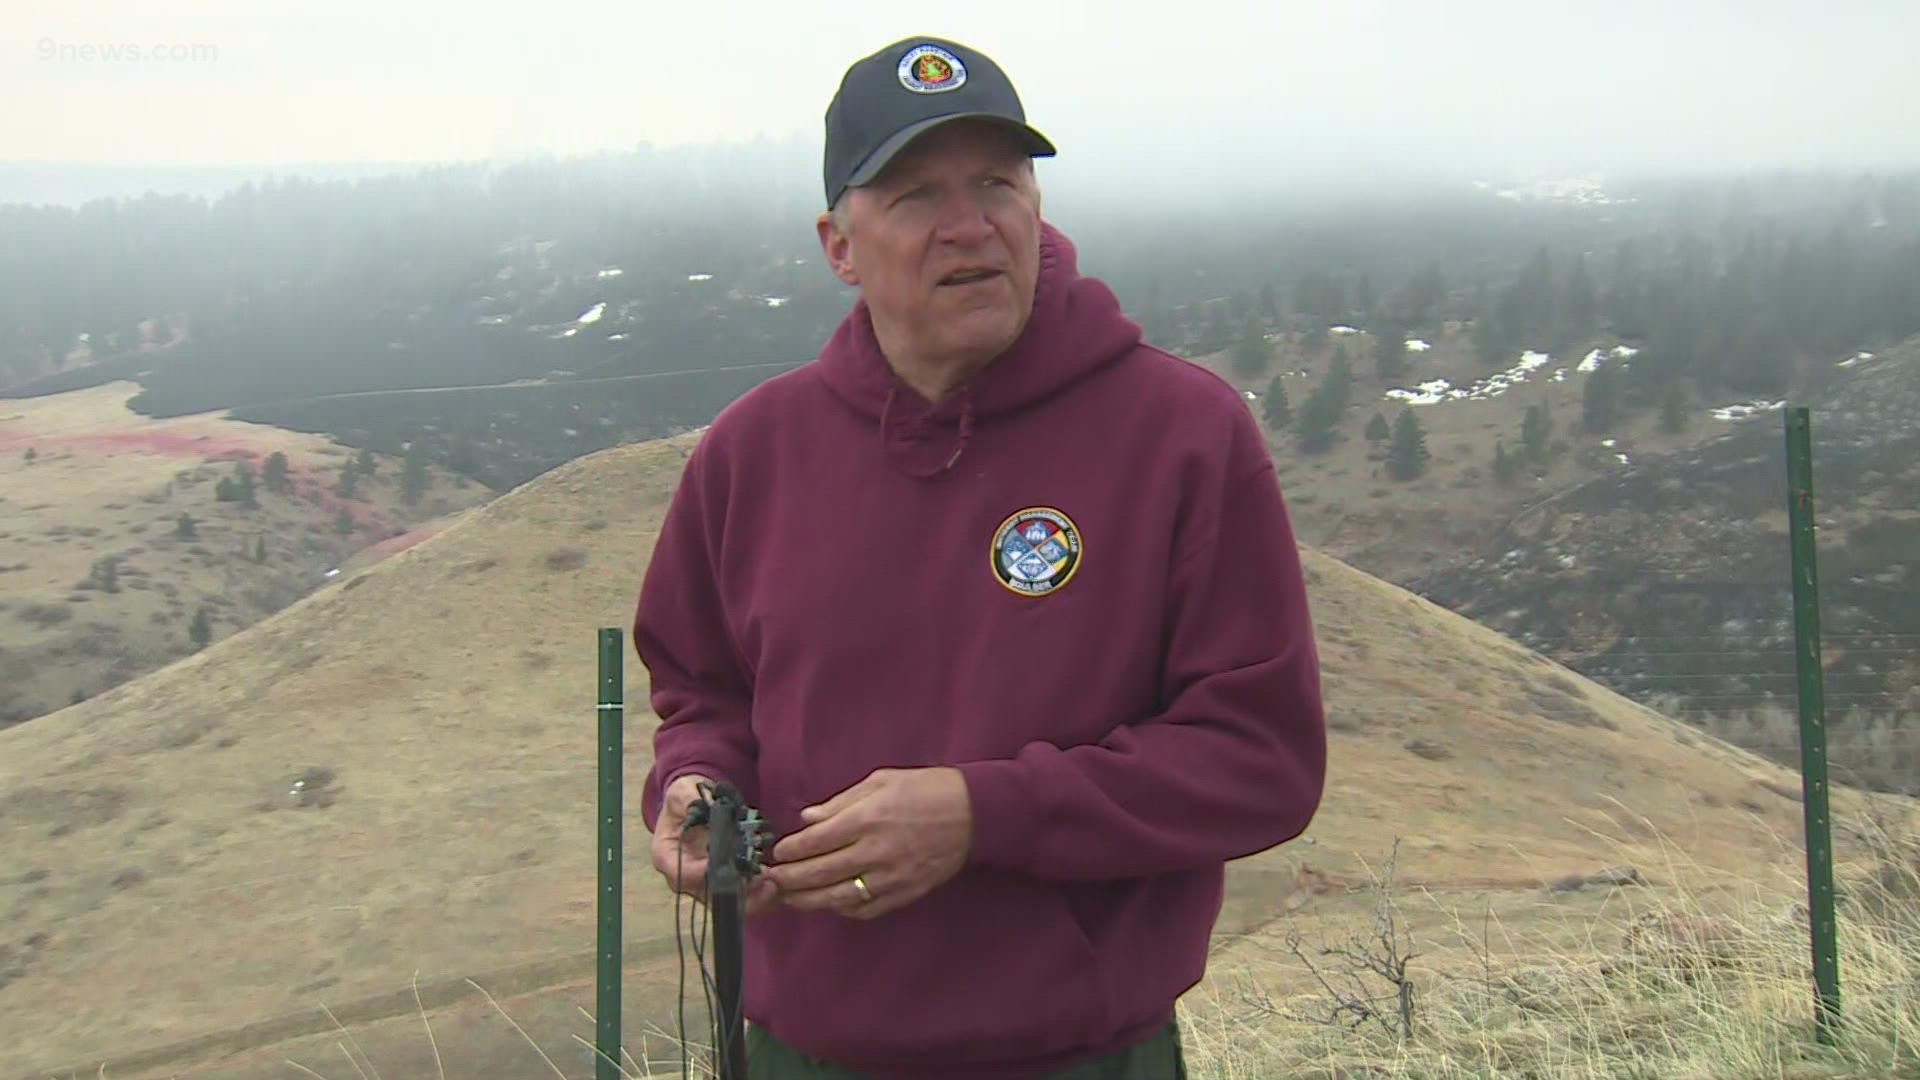 Boulder County officials said the fire is now 21% contained as of 9 a.m. on Sunday